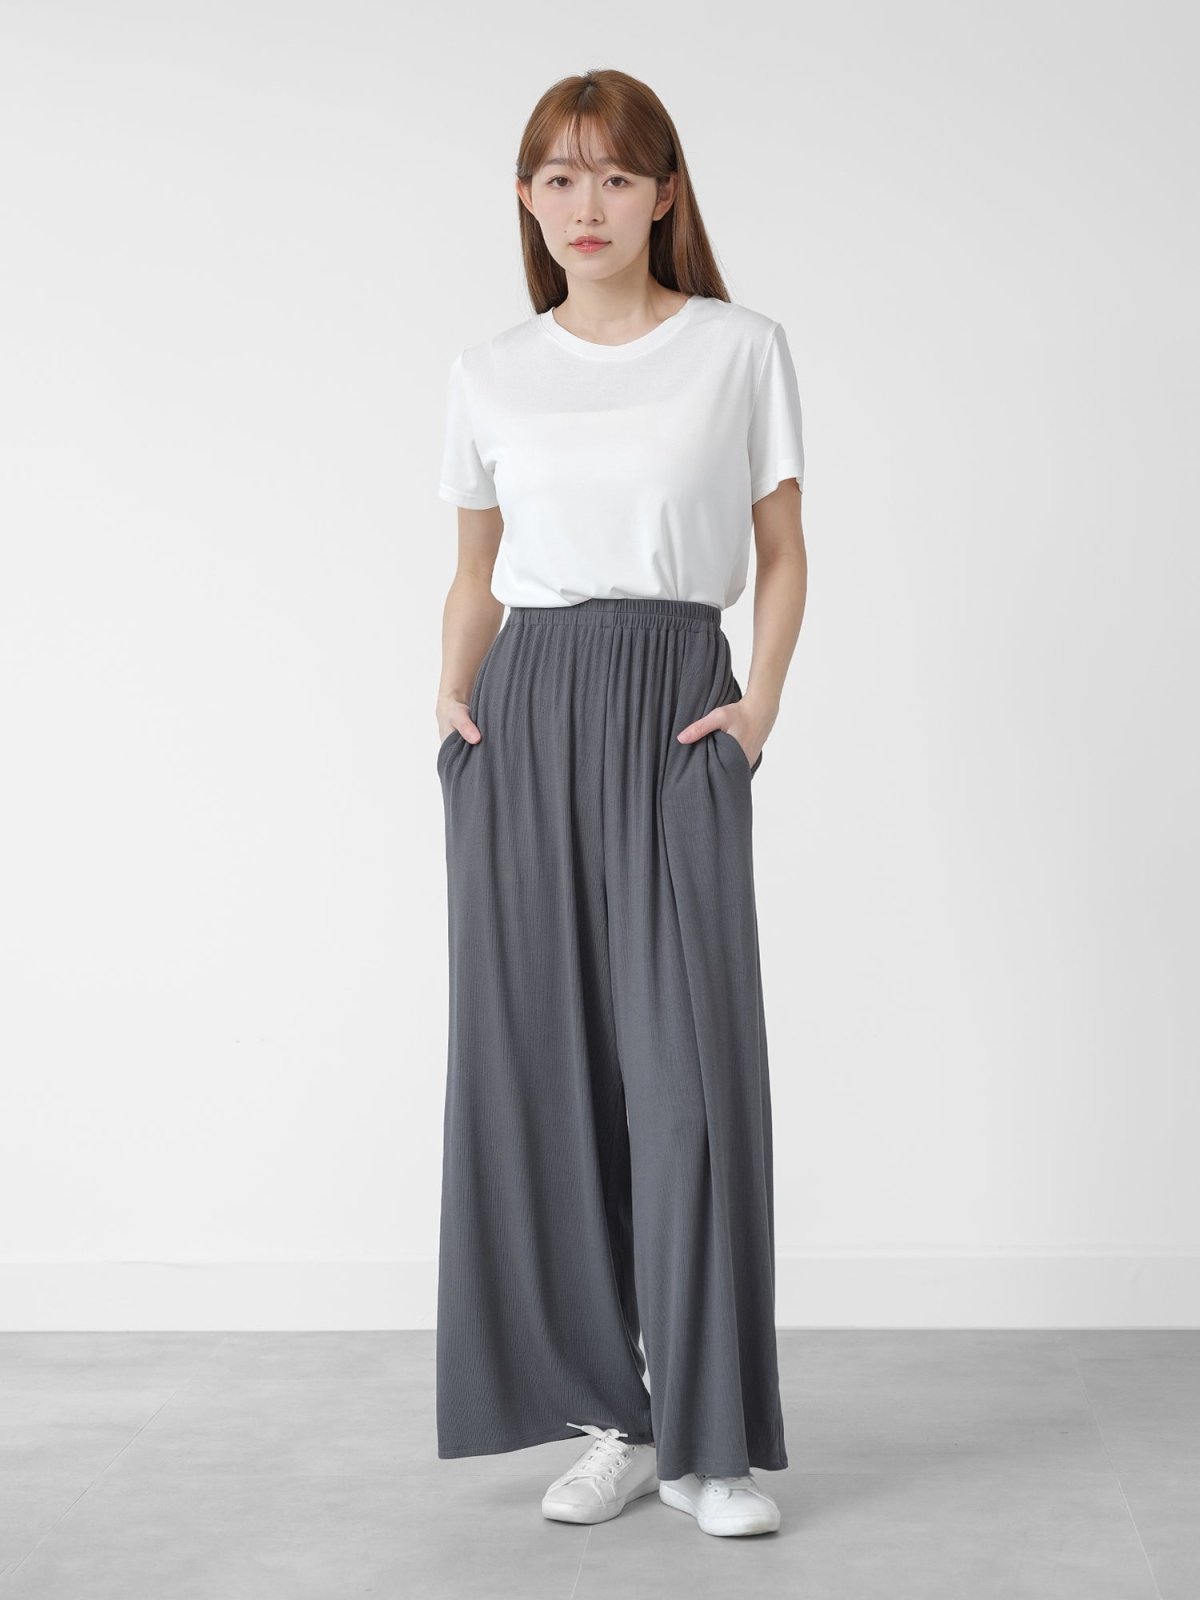 Relaxed Ribbed Knit Pants - DAG-DD1454-24CharcoalF - Charcoal - F - D'zage Designs